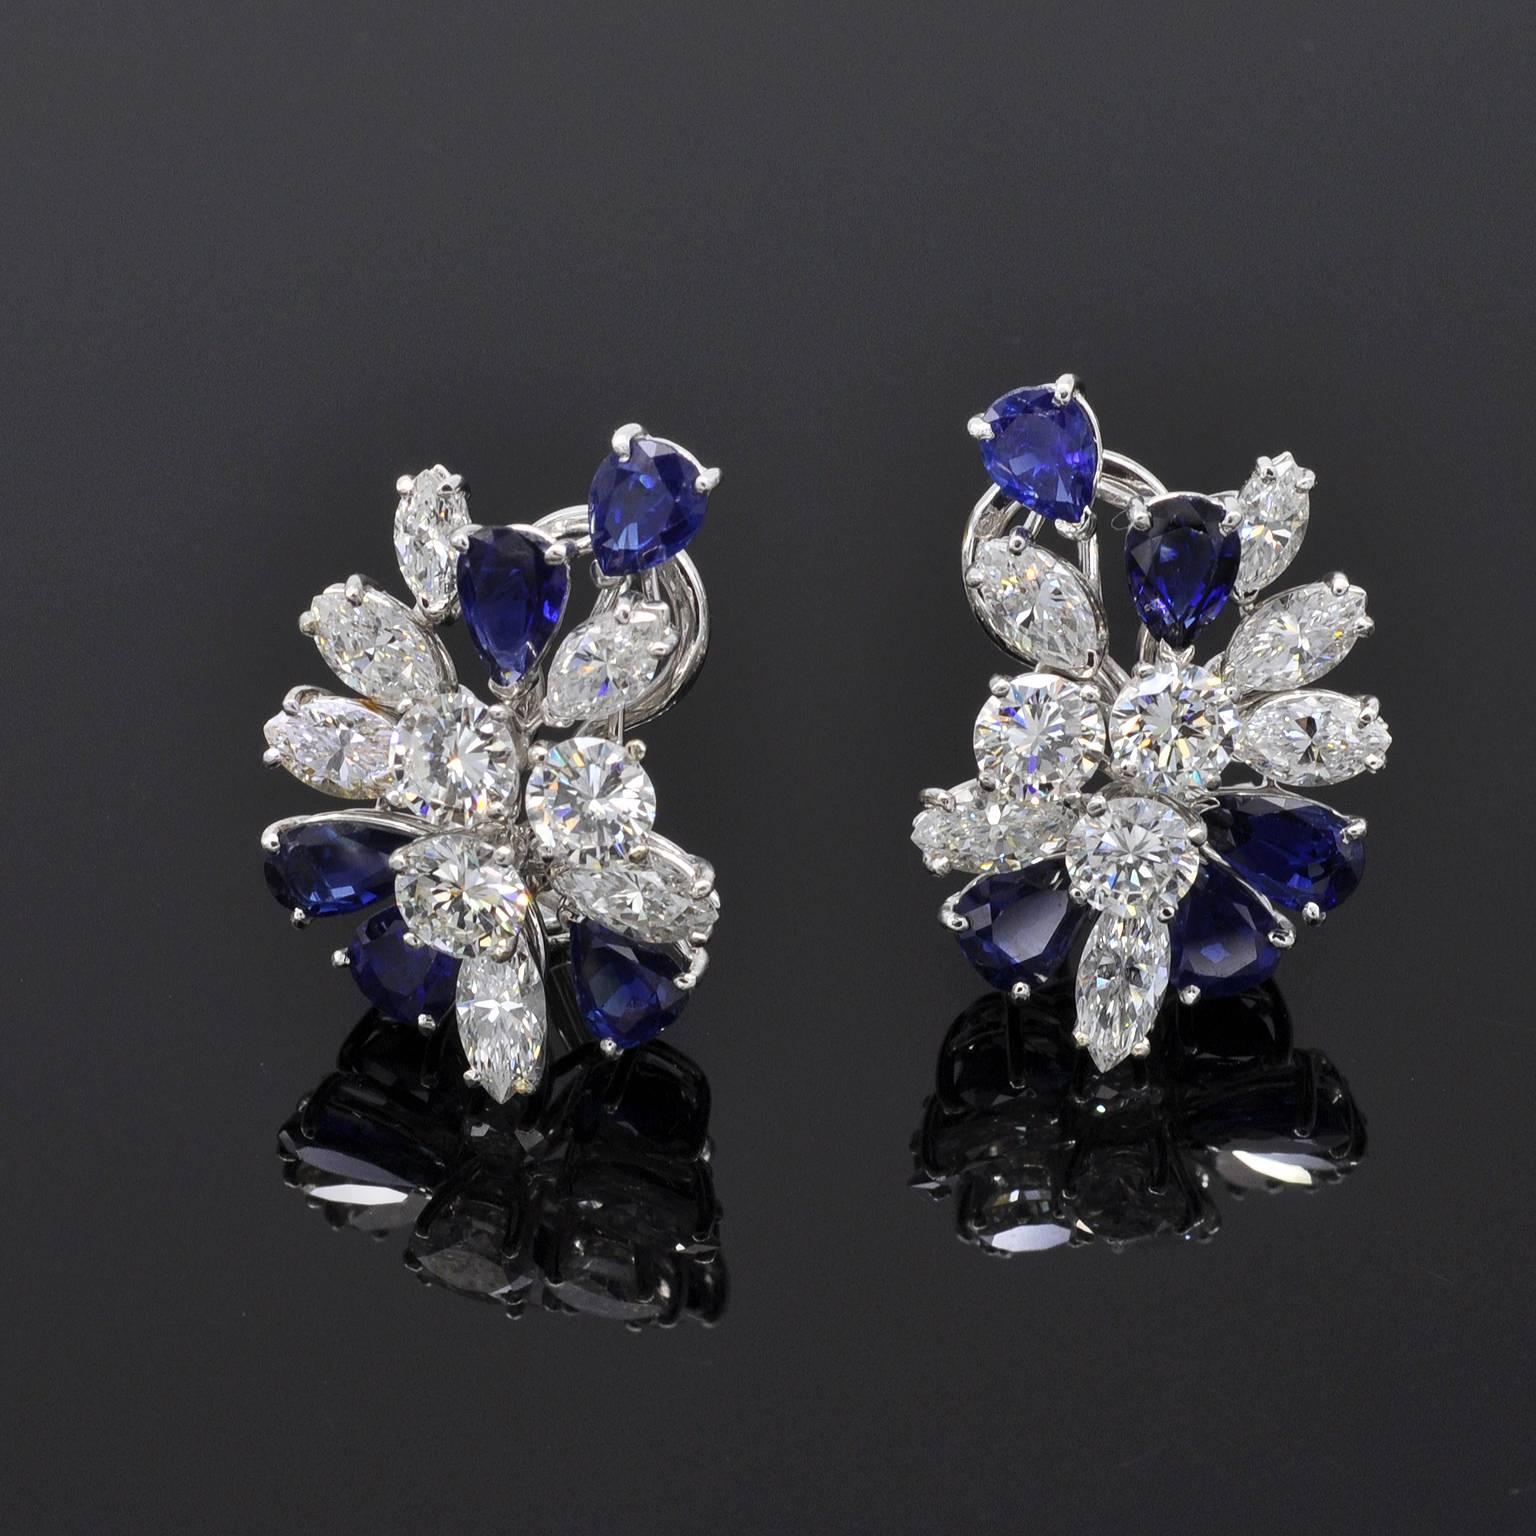 These classy earrings consists of a cluster of top quality diamonds and sapphires elegantly disposed. They are signed Missiaglia a famous italian jewelry founded in 1846 in venice. They are in perfect condition.

Details :
Six round brillant cut